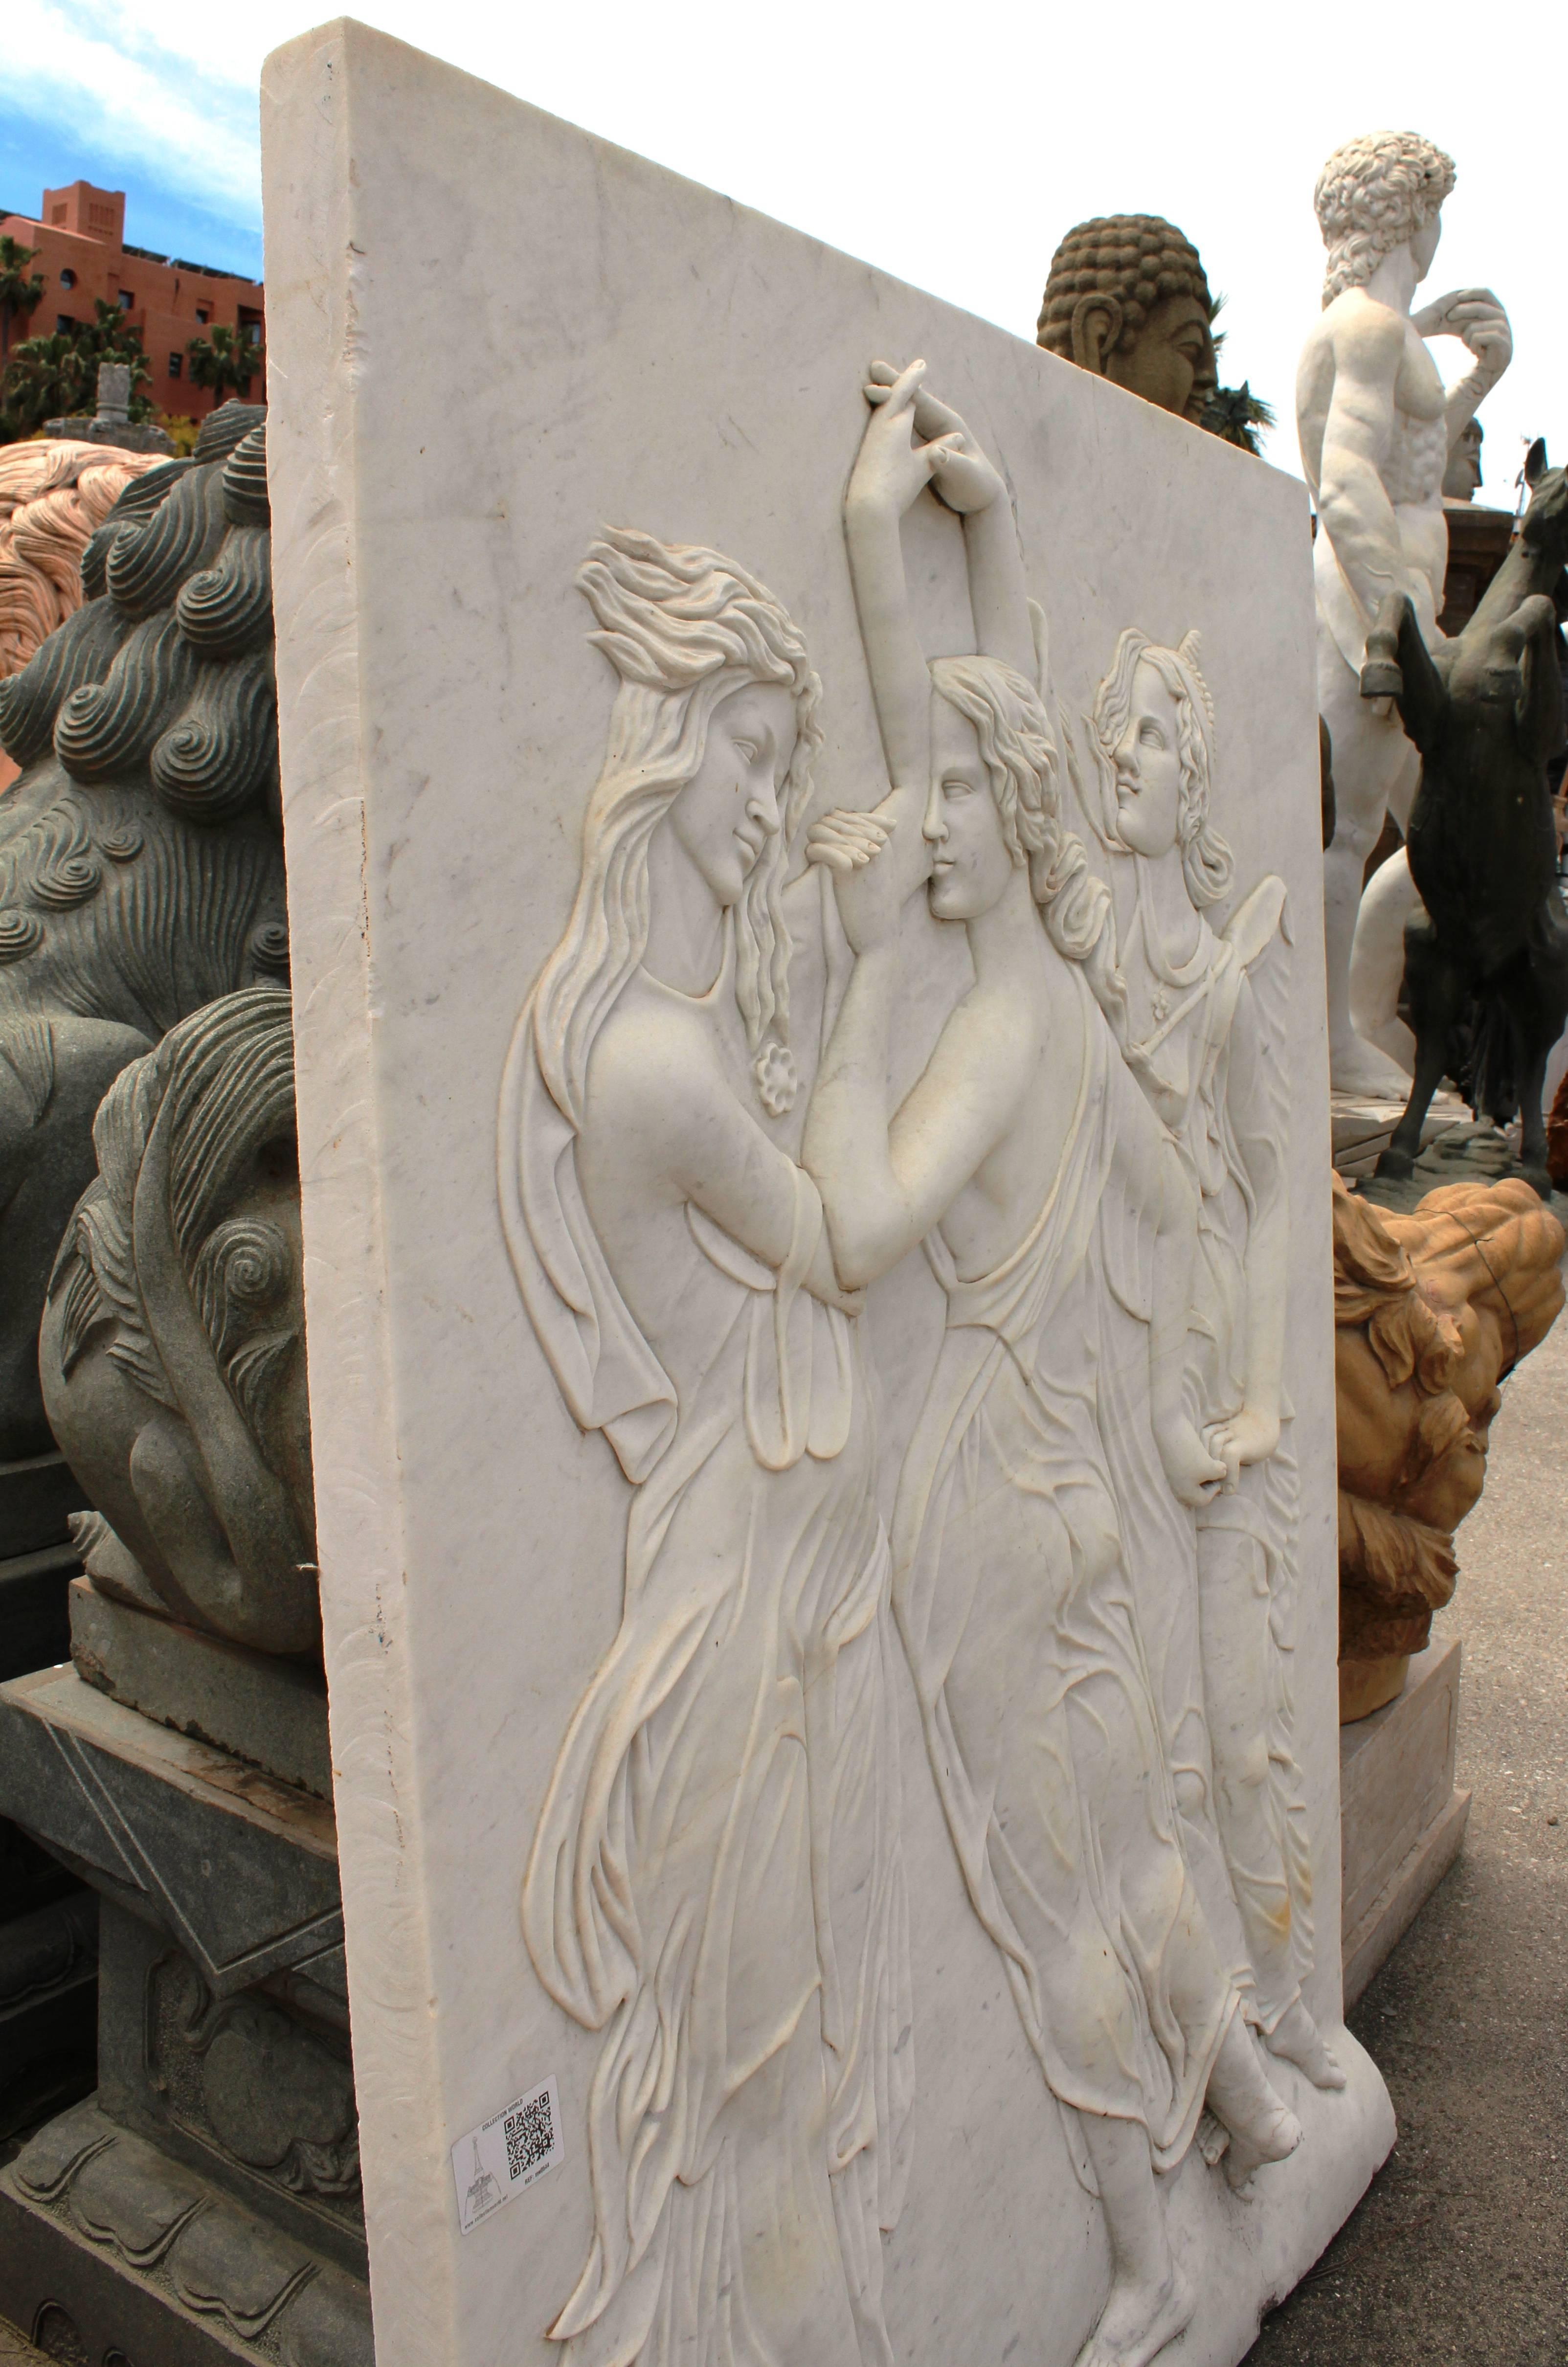 Italian Three Graces Relief Hand-Carved in White Carrara Marble